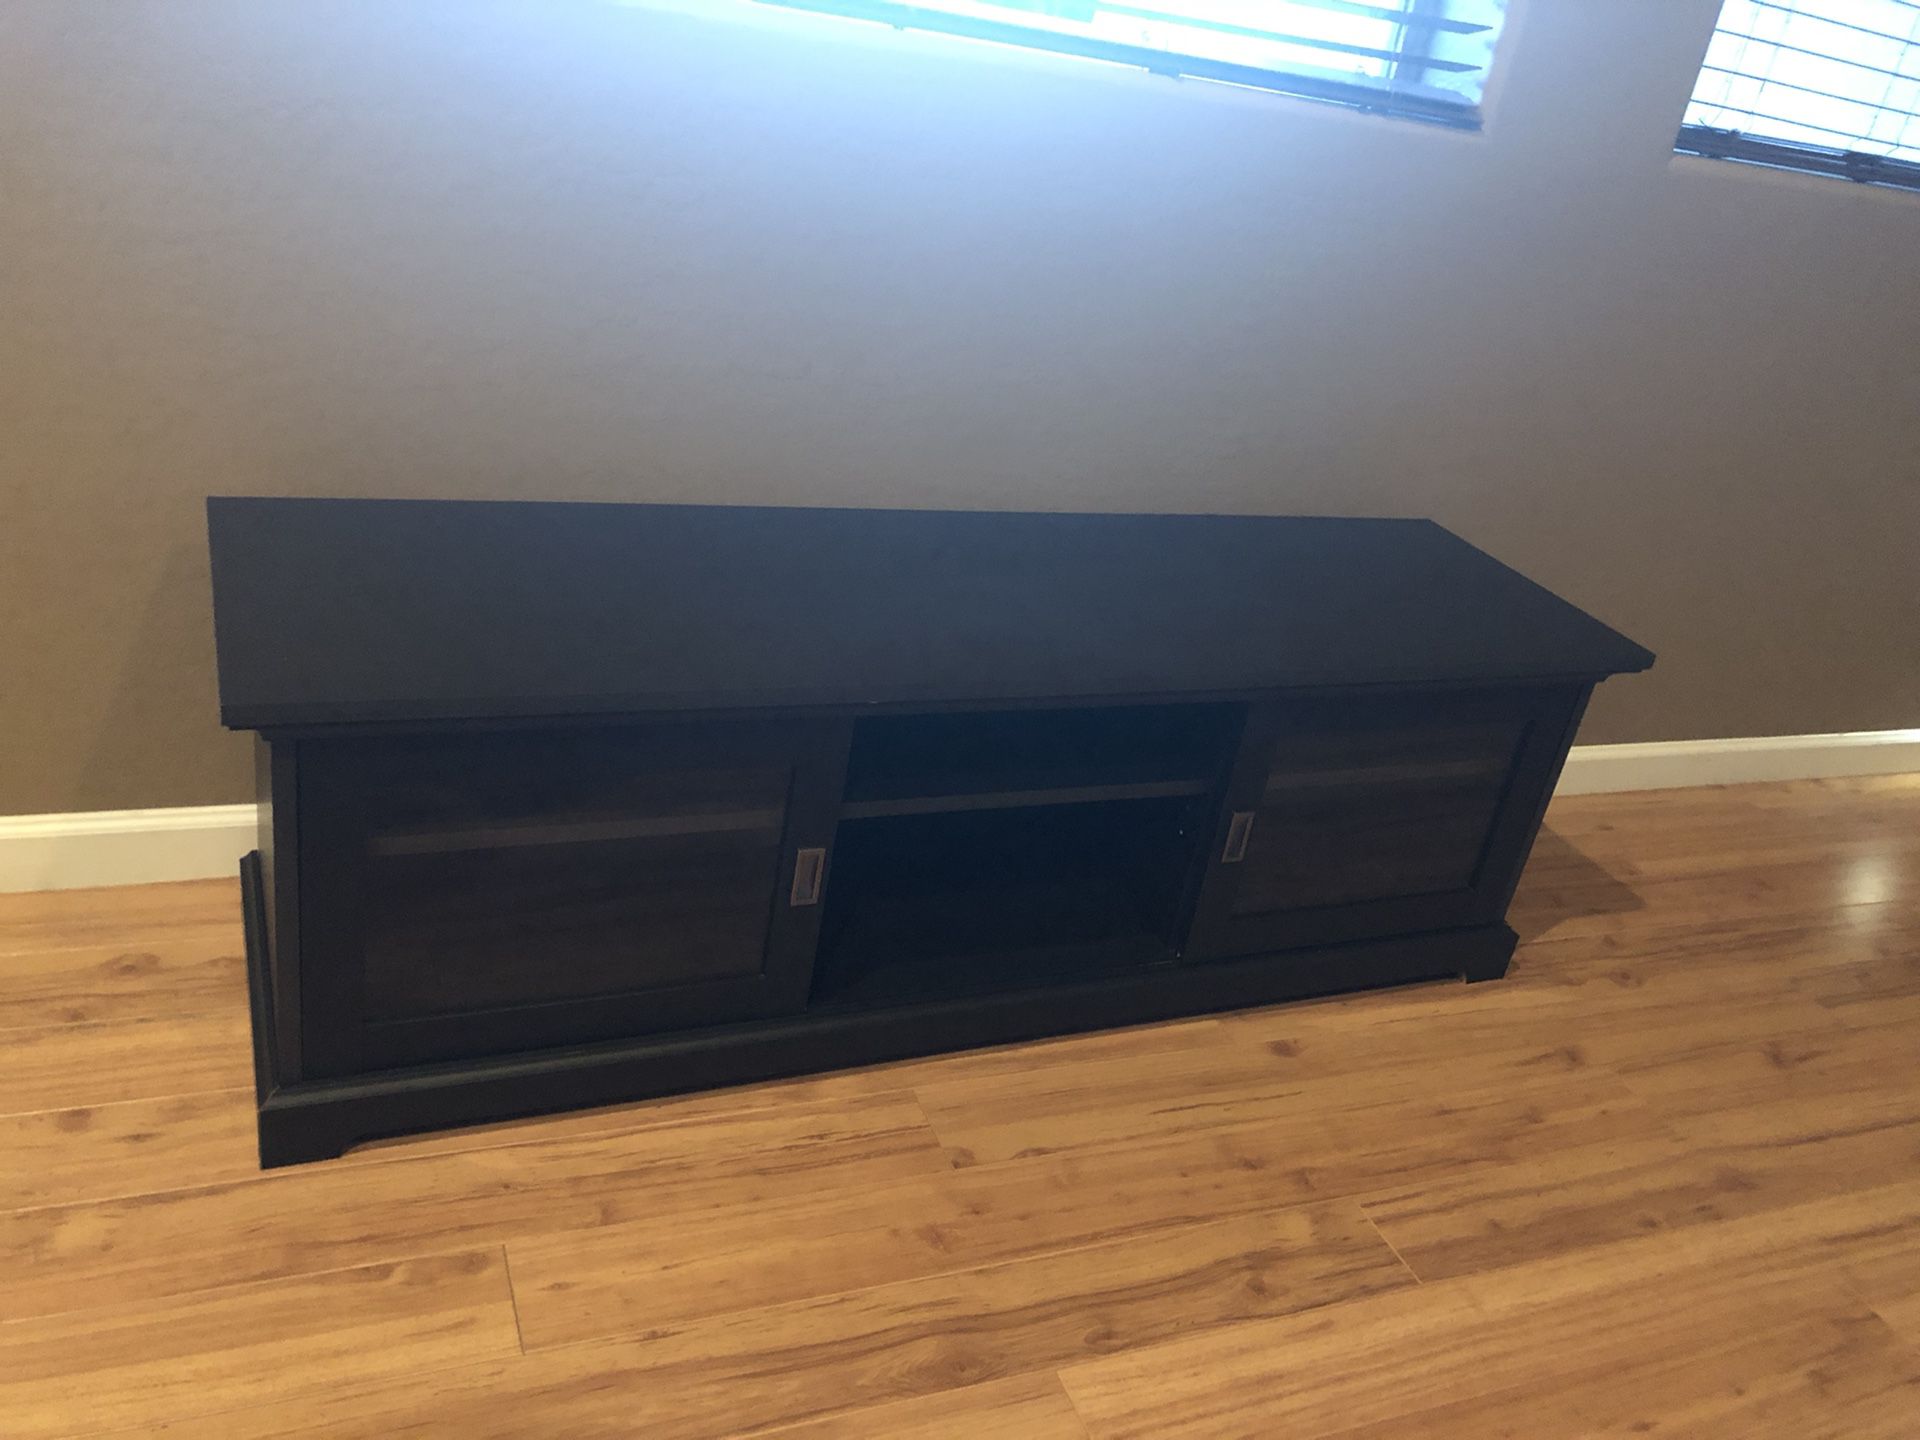 Very nice black wood with glass doors Tv / television stand